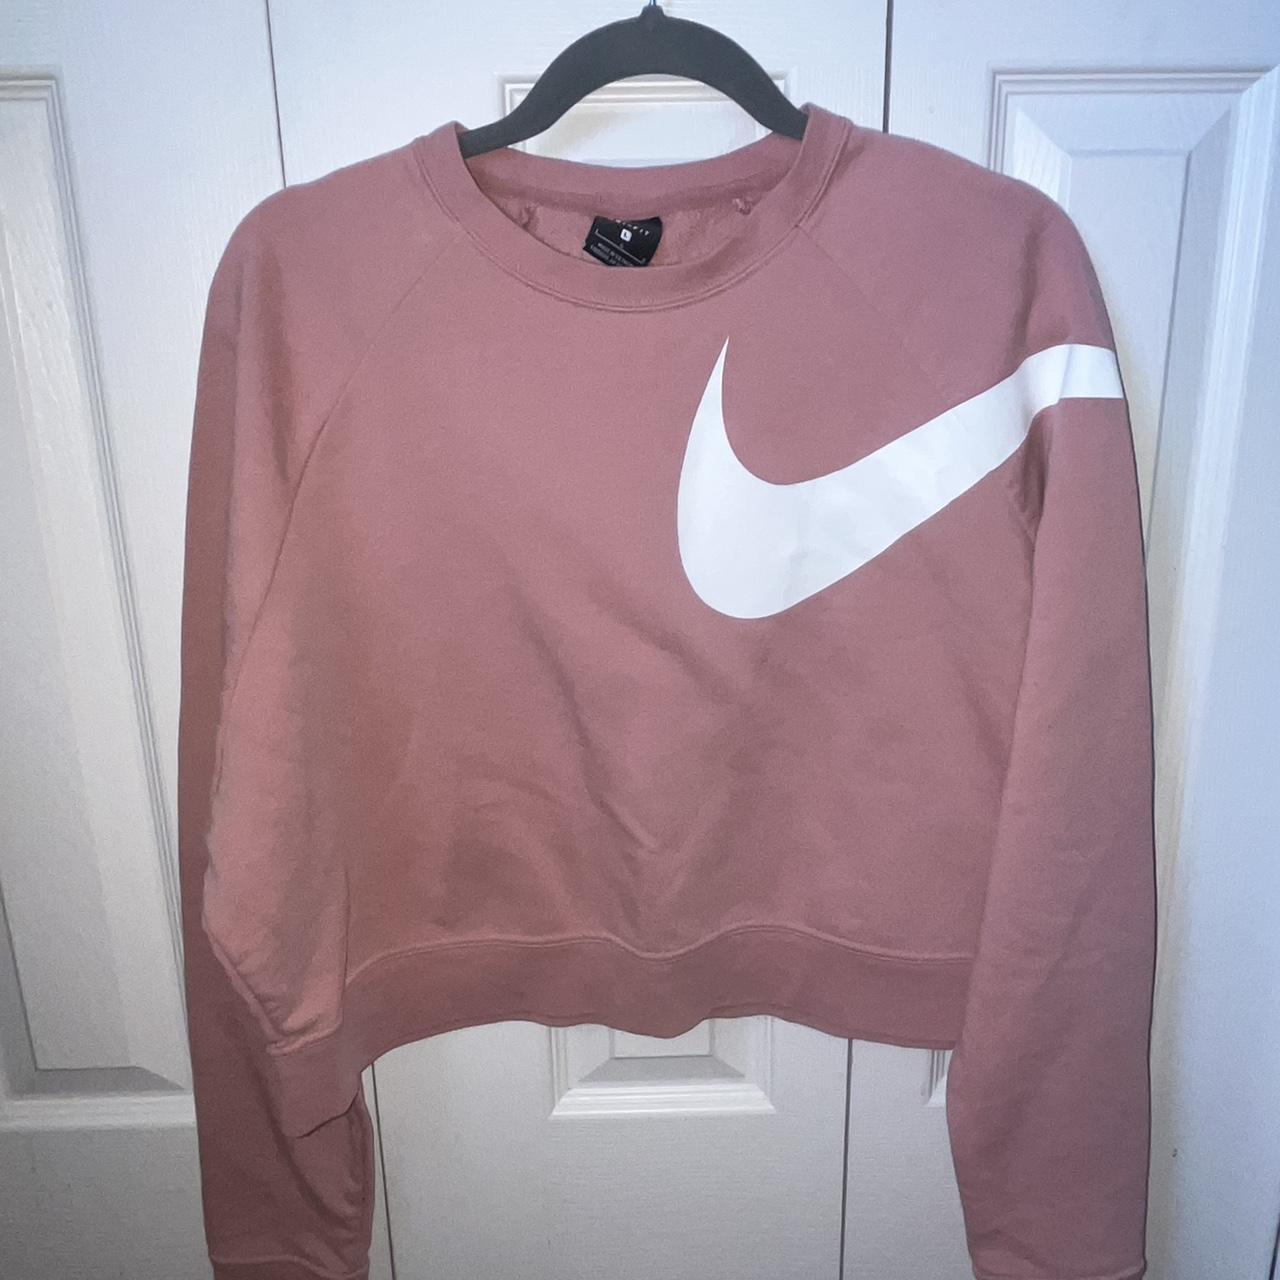 Pink cropped Nike Sweater. Good condition and very... - Depop